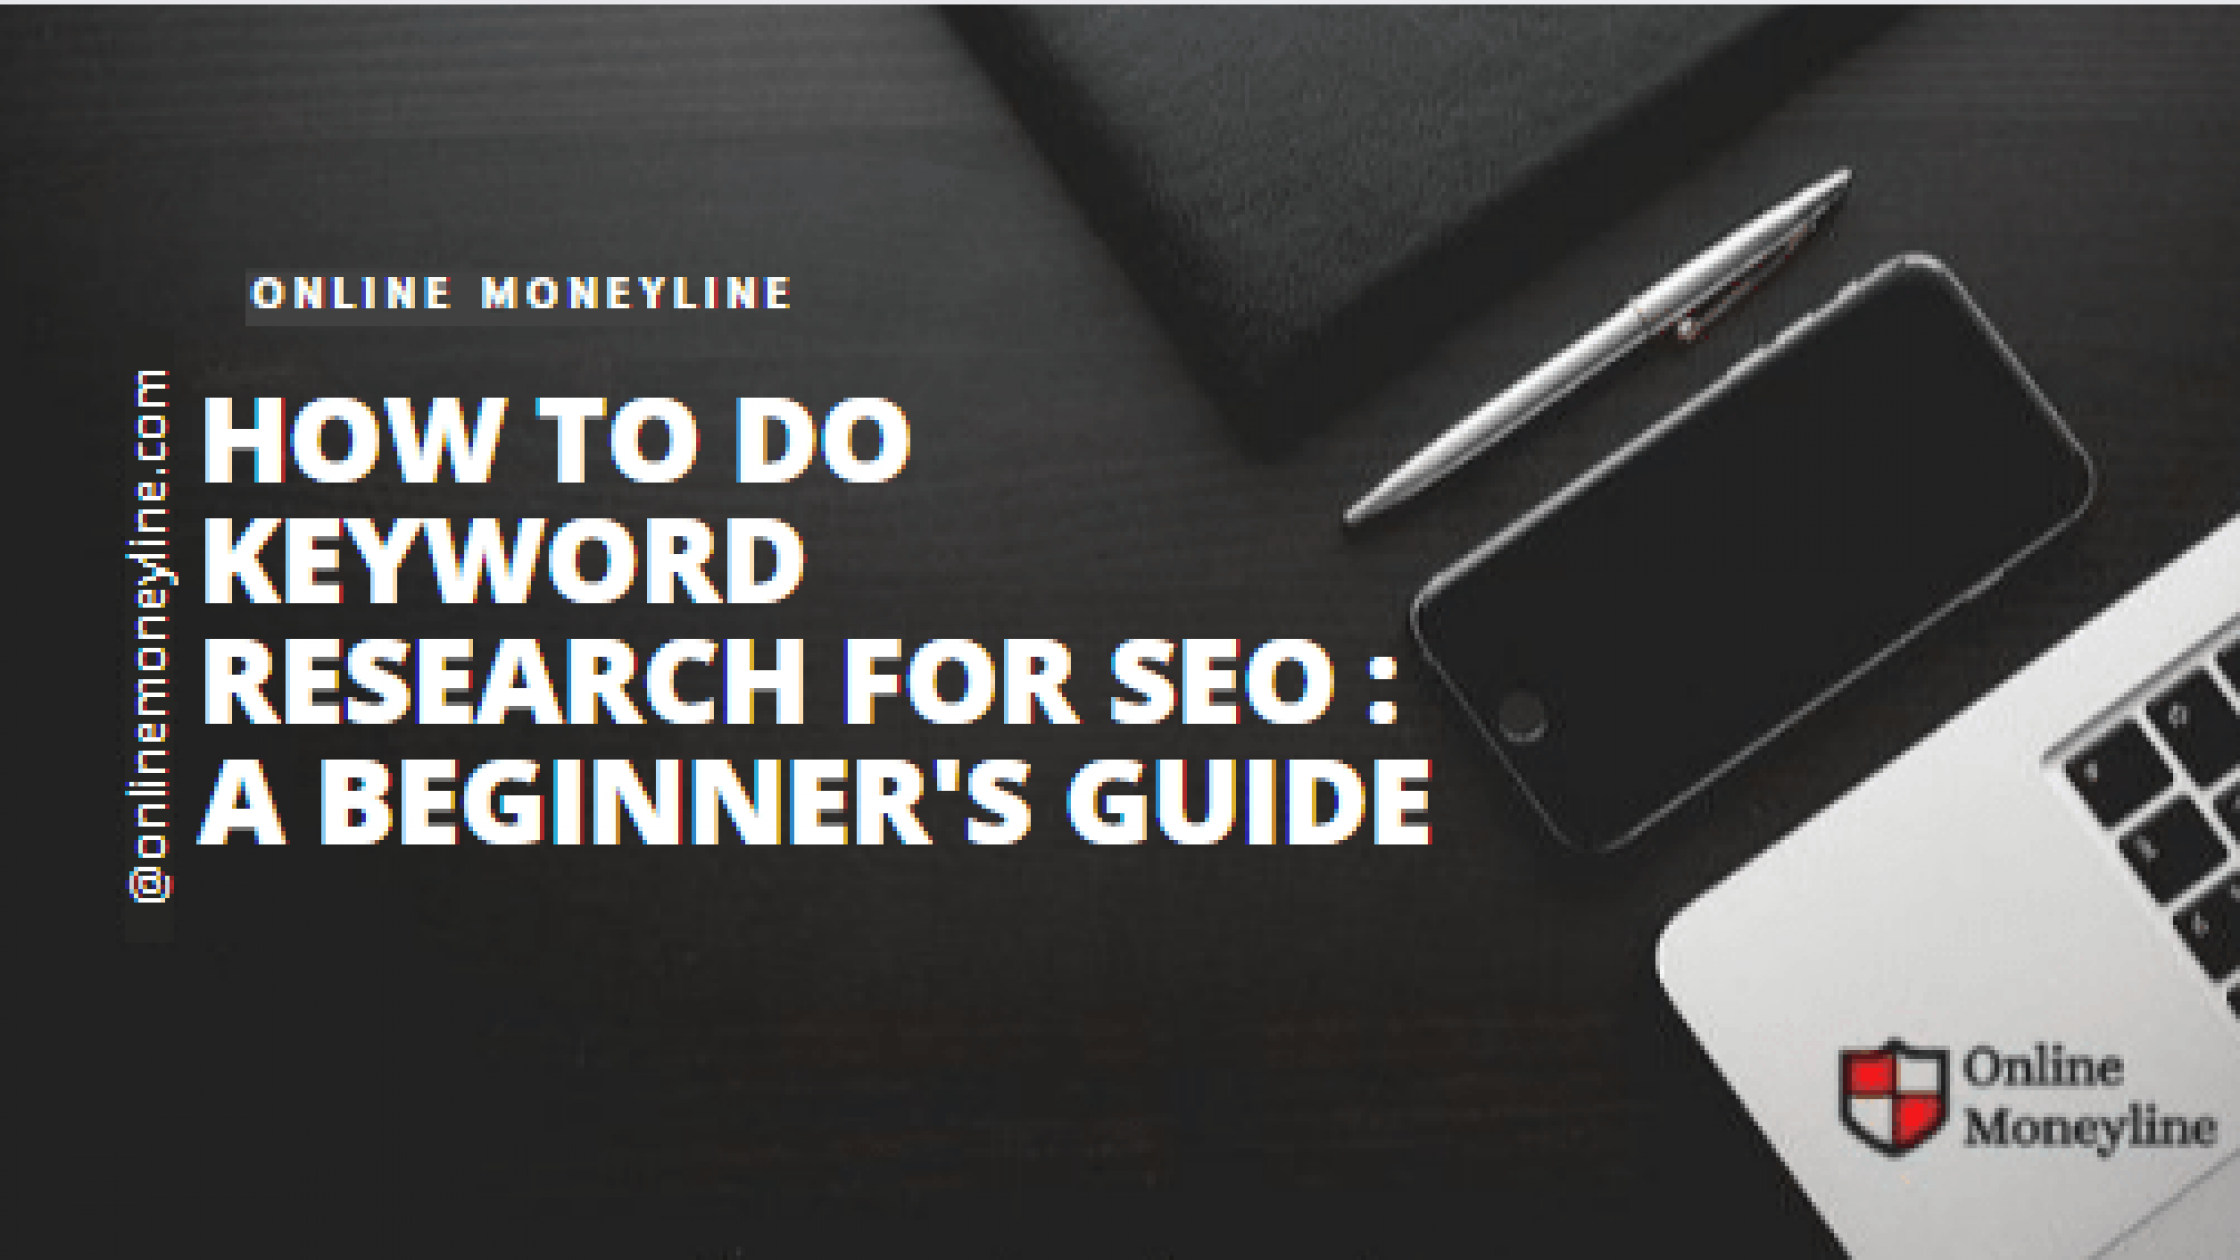 How To Do Keyword Research For SEO : A Beginner’s Guide